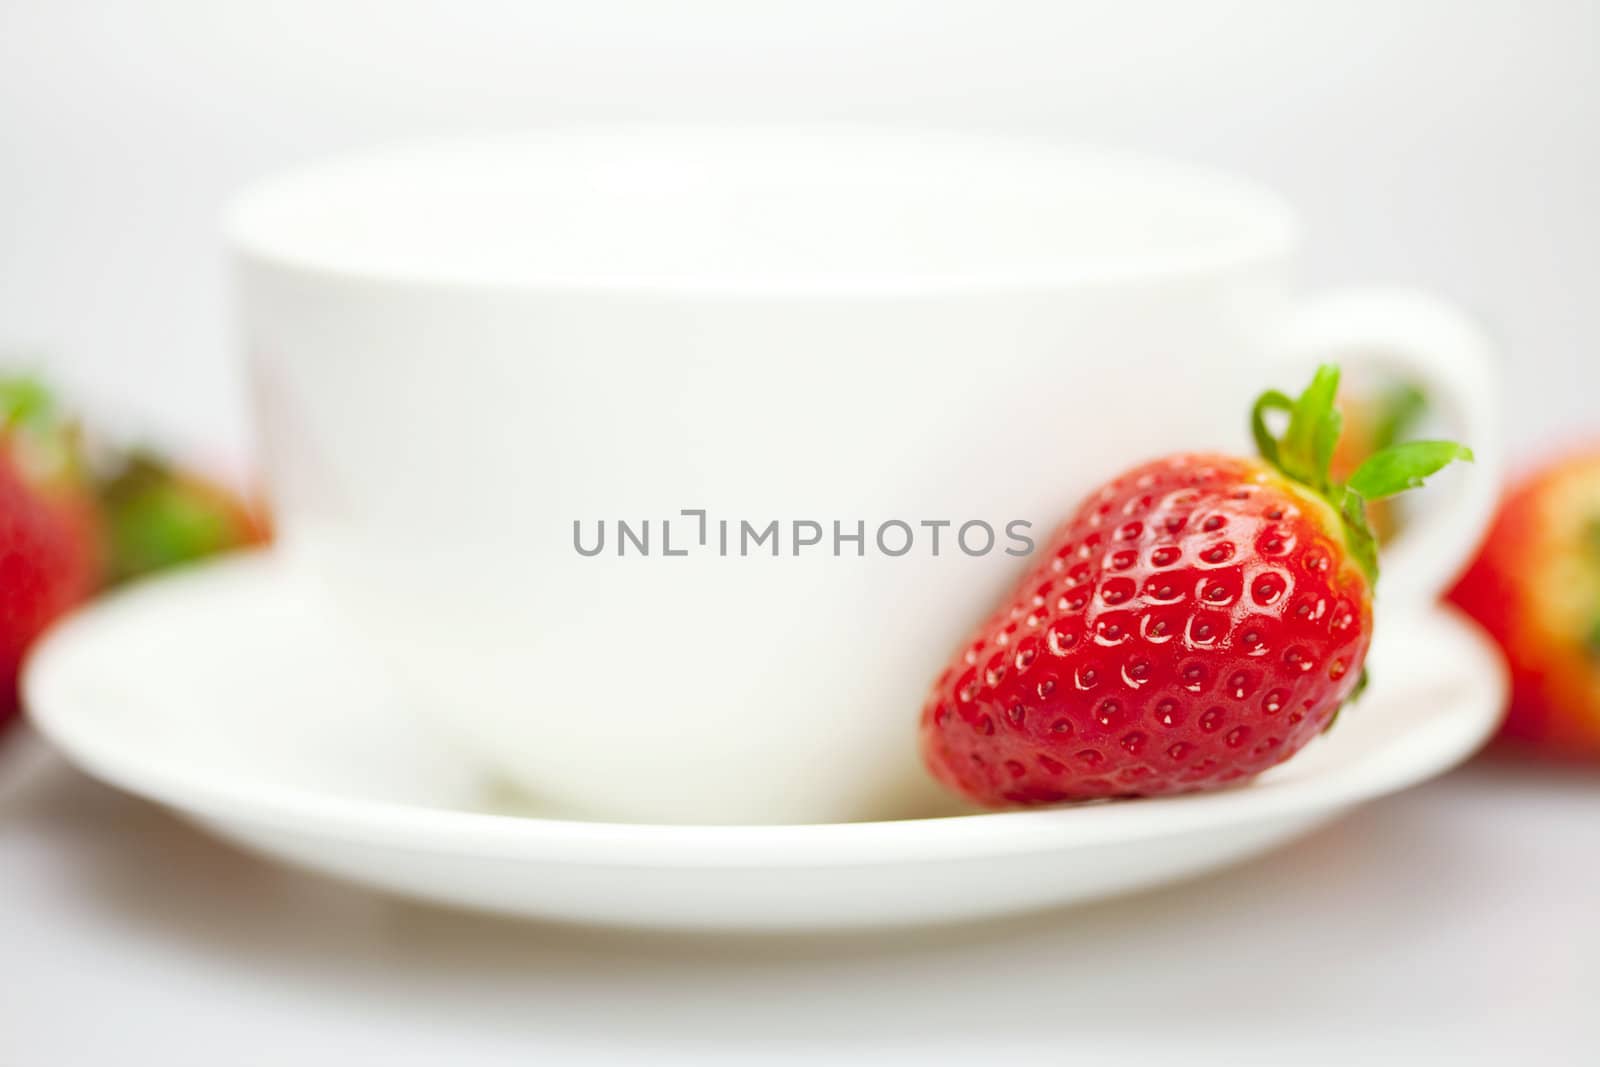 juicy strawberries and a cup of white isolated on white